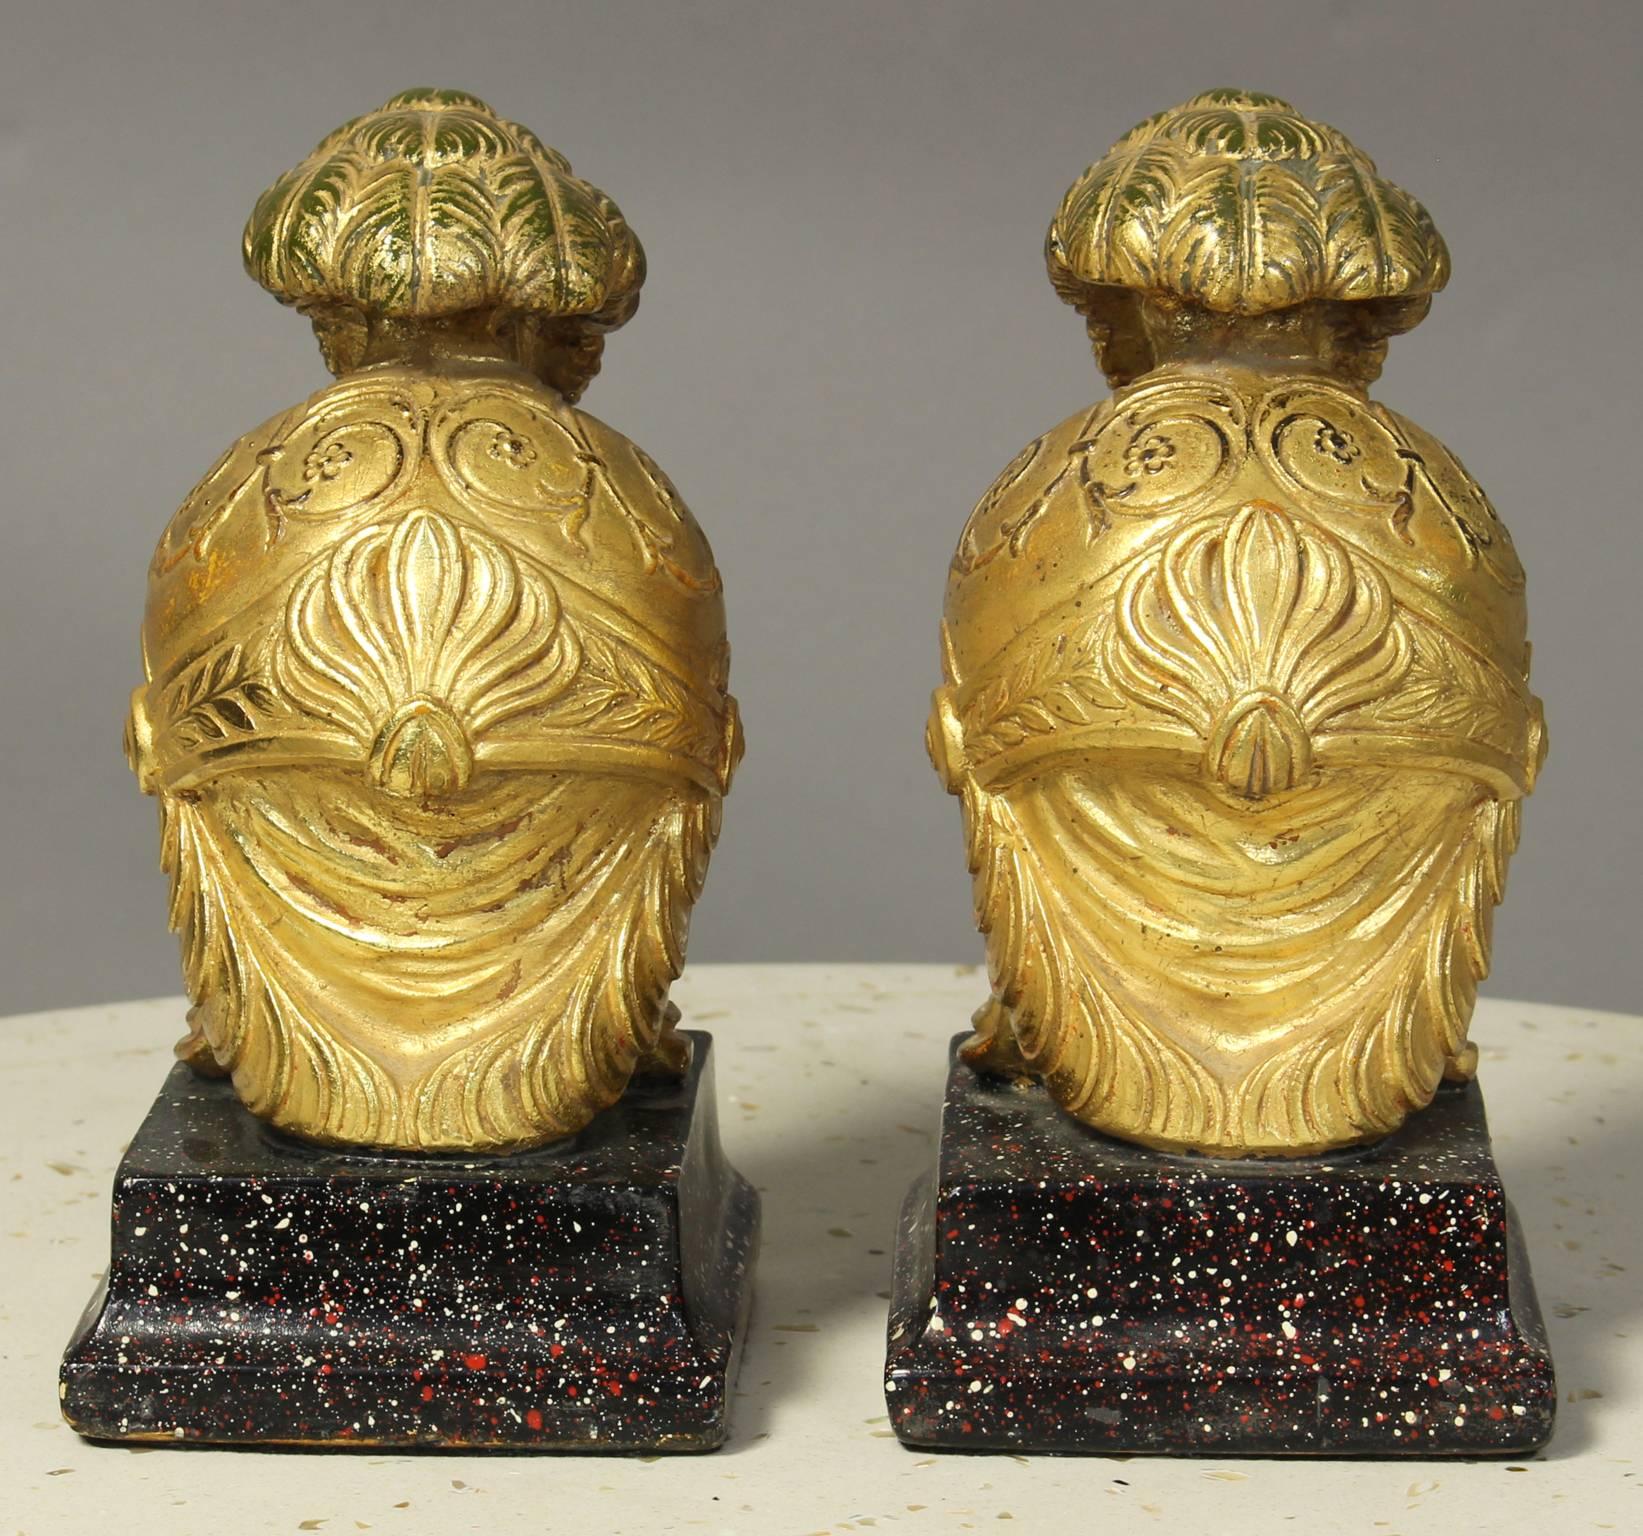 A delightful pair of Italian mid-20th century gilt and paint decorated Roman helmet bookends on faux stone bases made by Borghese.